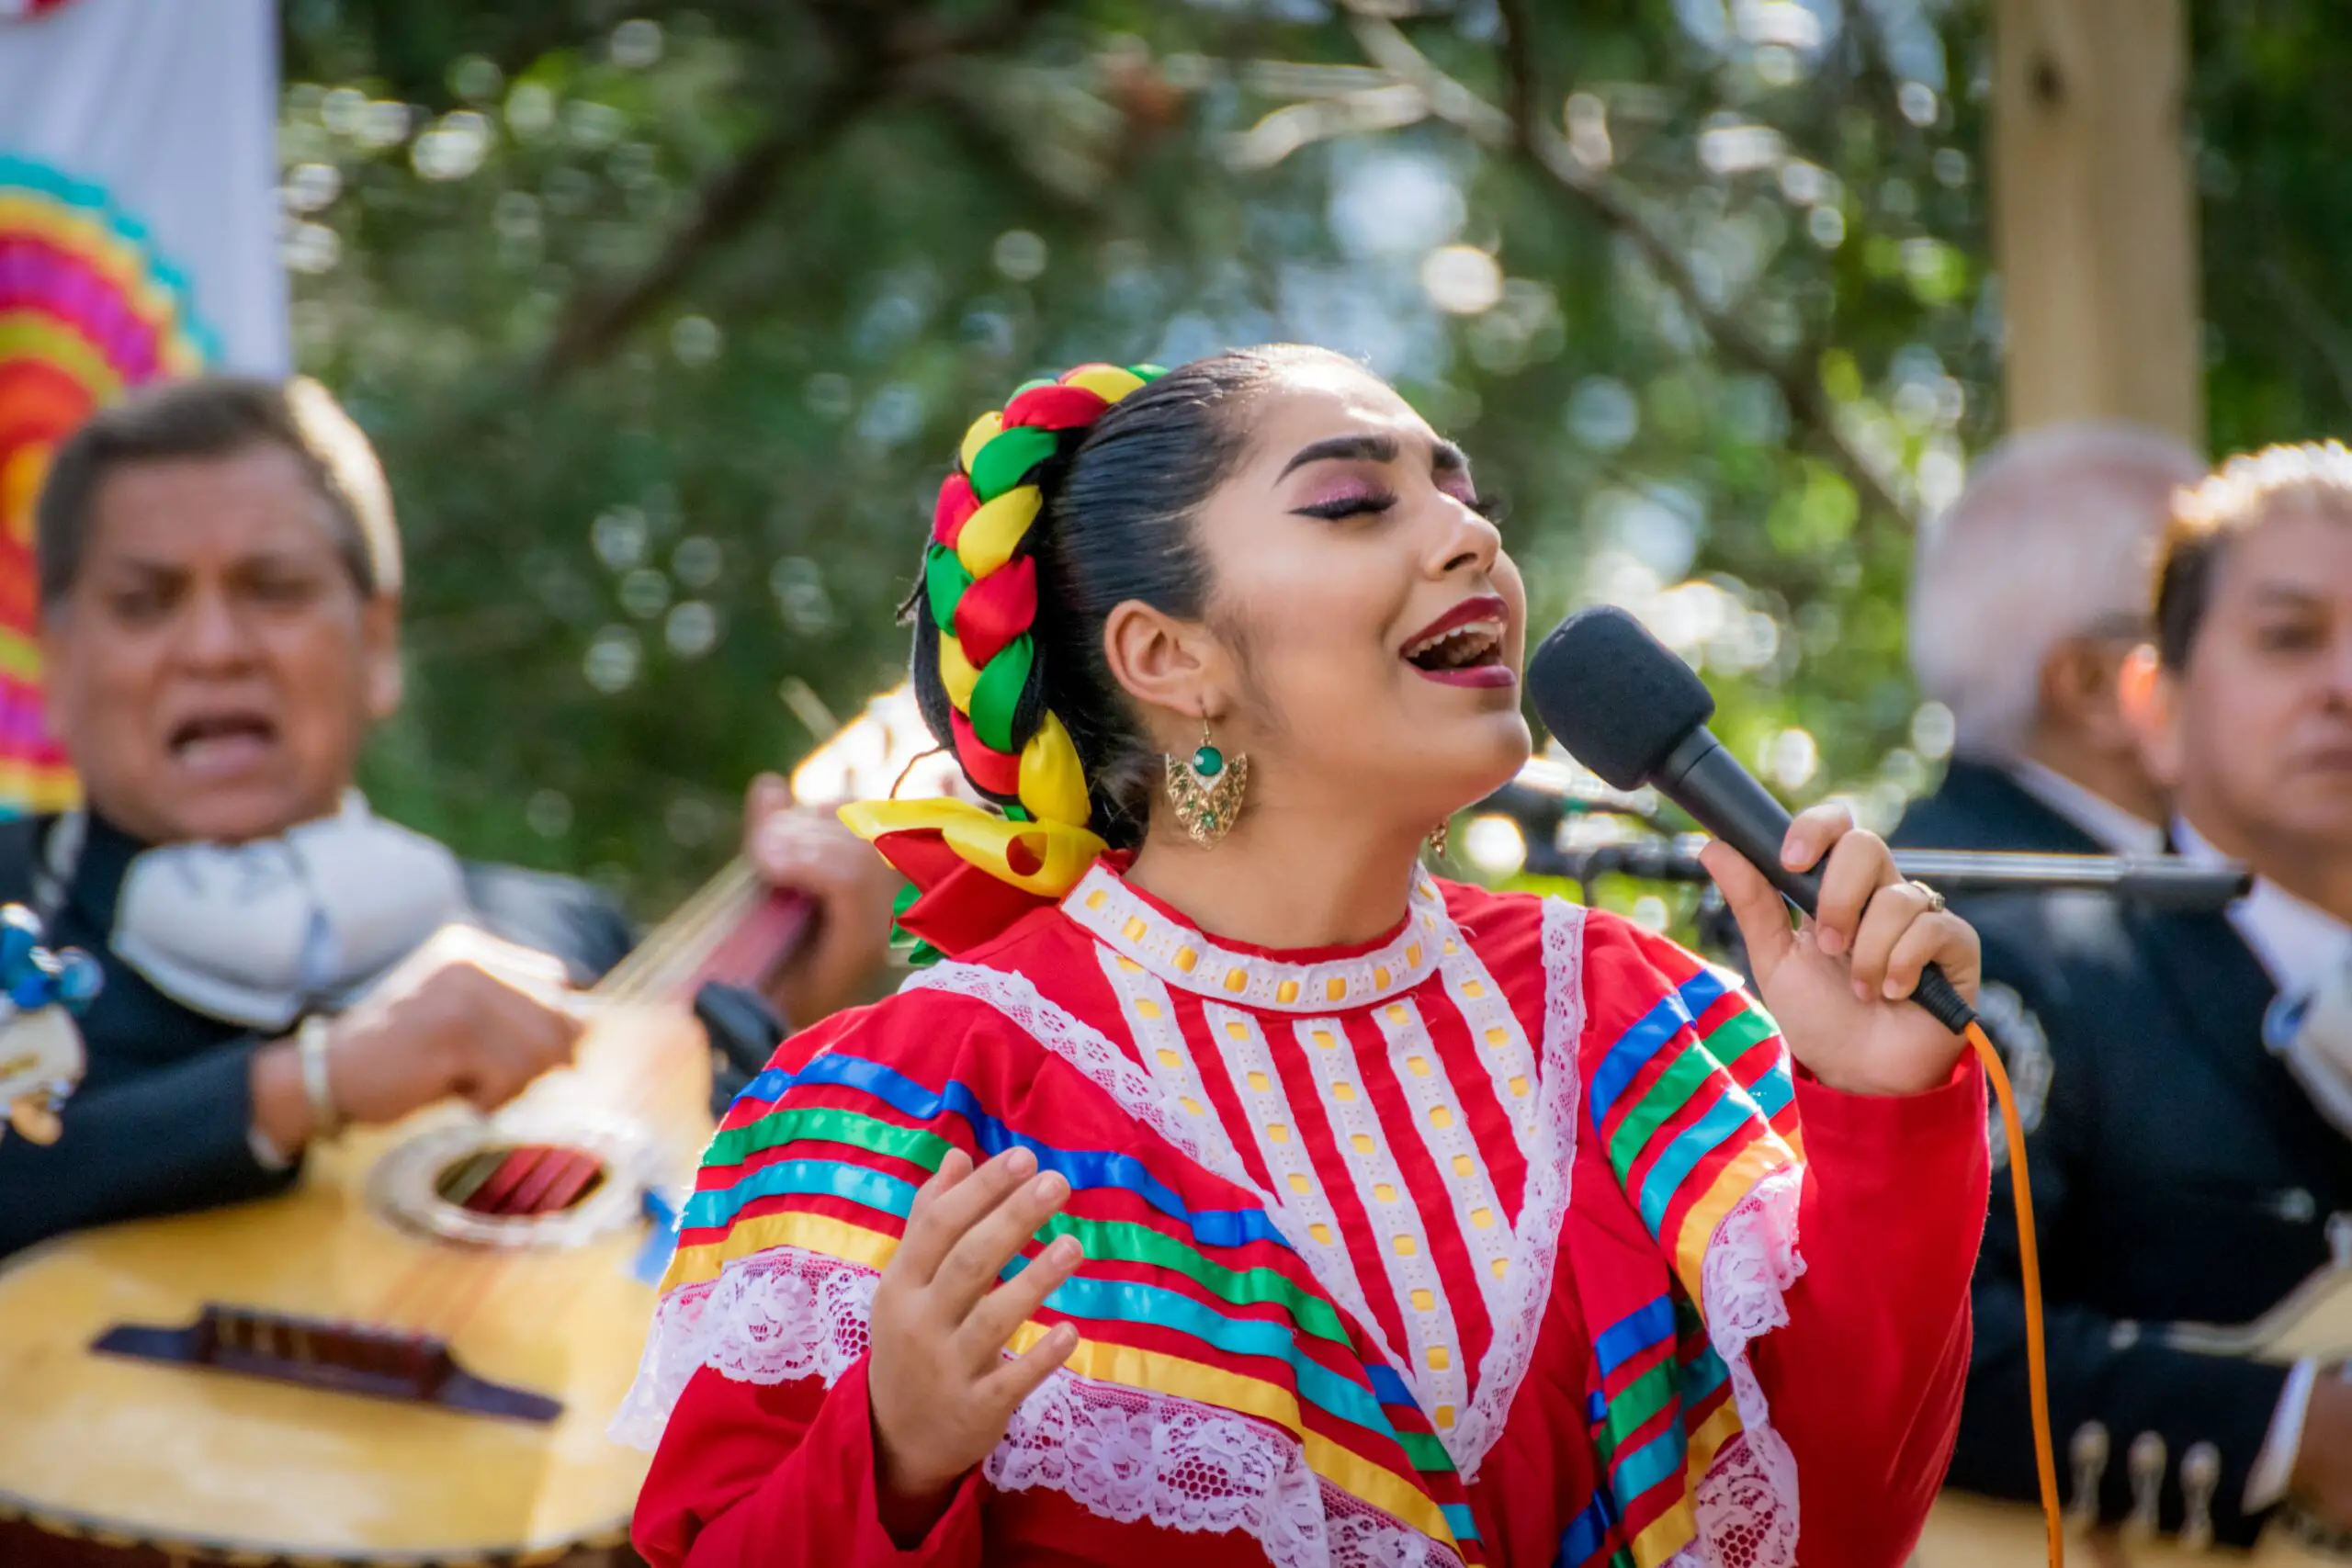 Image of a female performer singing while wearing colorful dress.